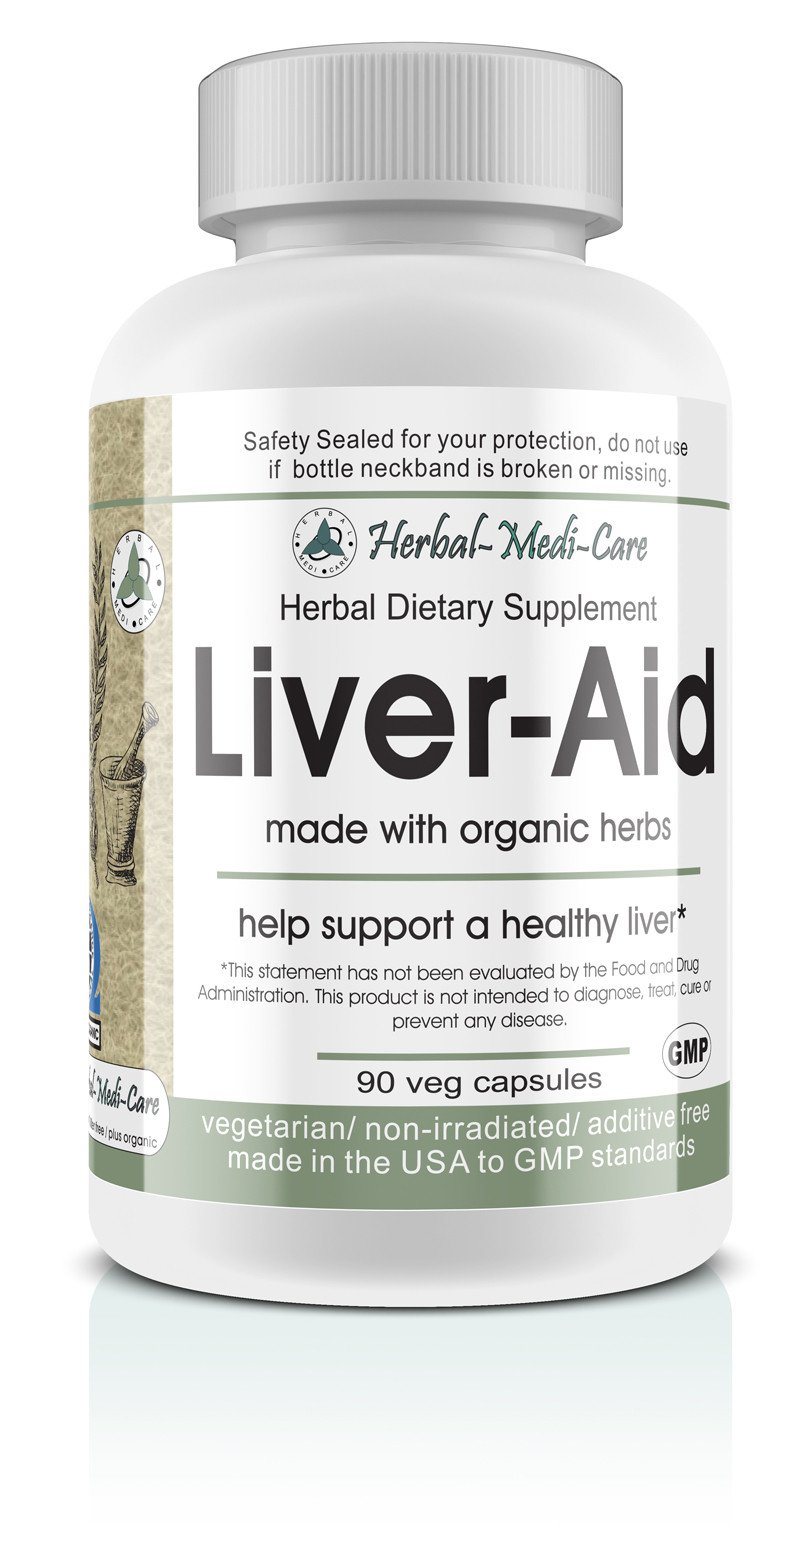 Herbal-Medi-Care Whole Food Liver-Aid Vegetarian Capsules; 90-Count, Made with Organic - Herbal-Medi-Care Whole Food Liver-Aid Vegetarian Capsules; 90-Count, Made with Organic - Herbal-Medi-Care Whole Food Liver-Aid Vegetarian Capsules; 90-Count, Made with Organic